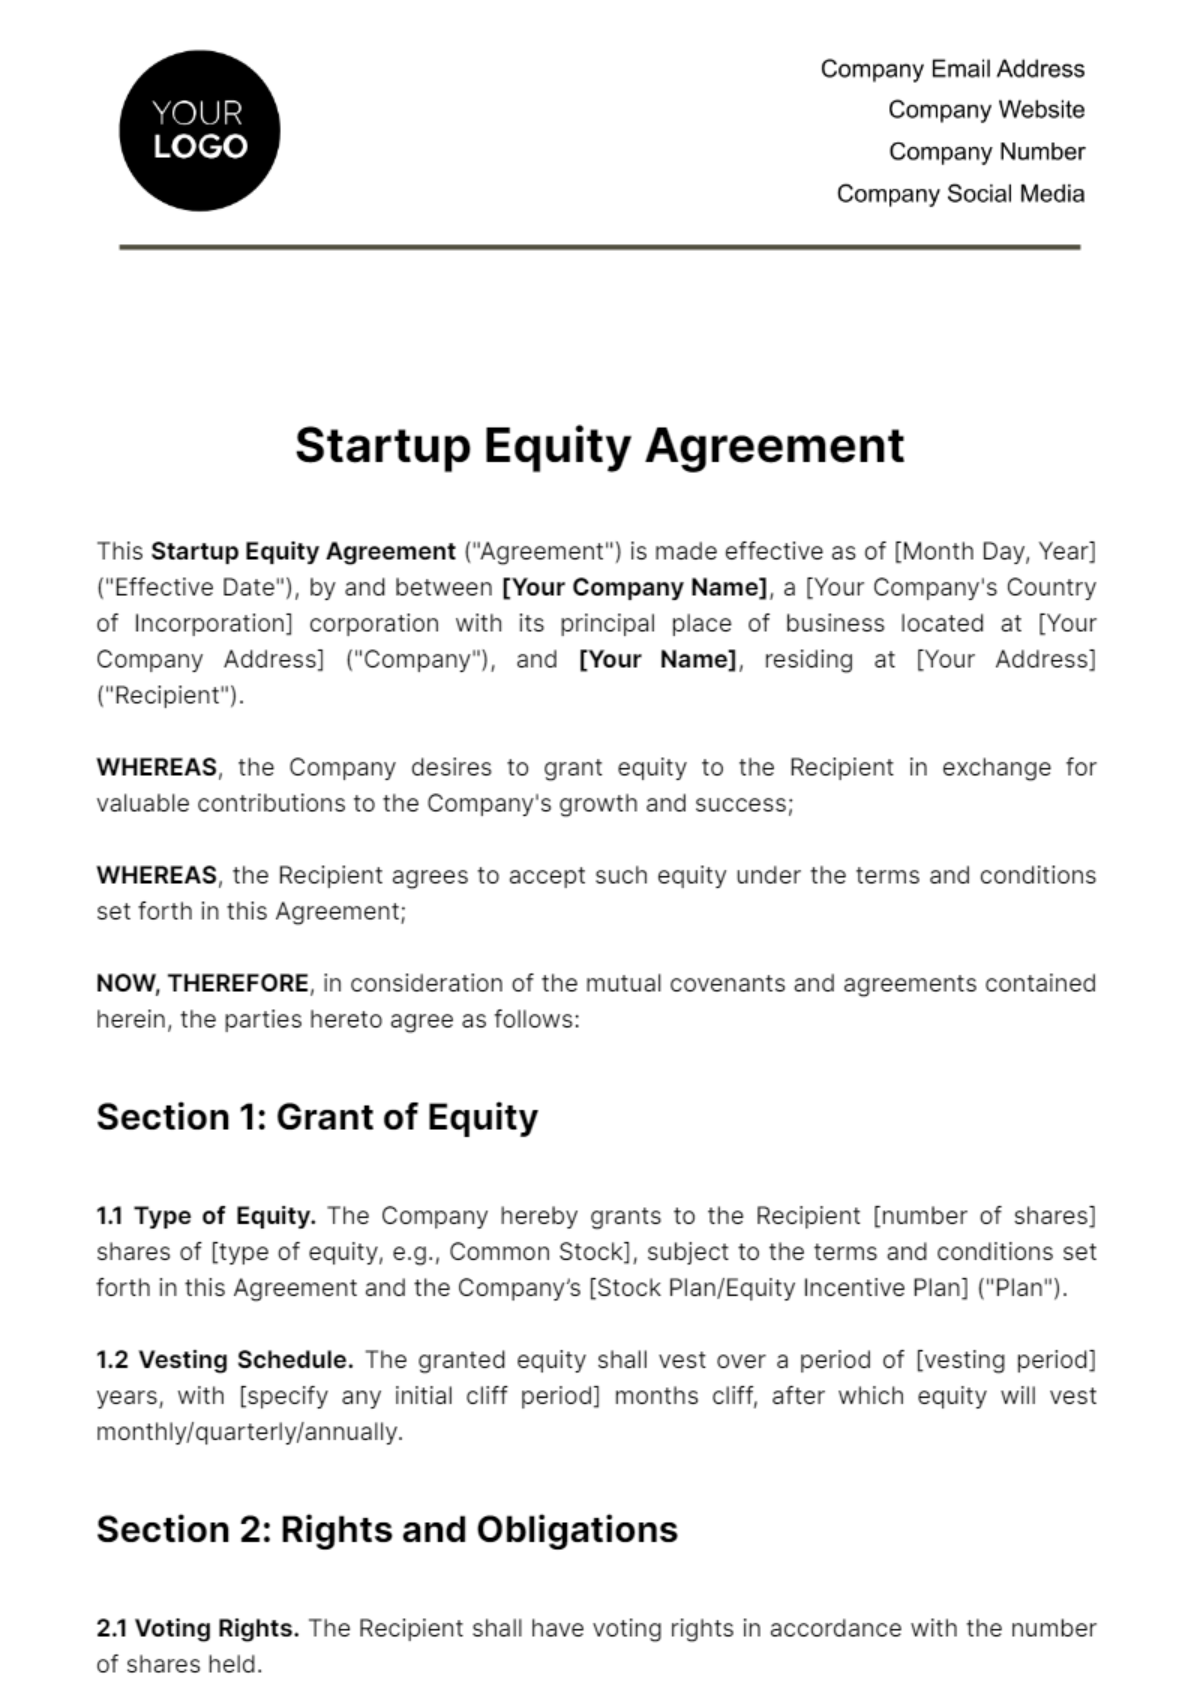 Free Startup Equity Agreement Template